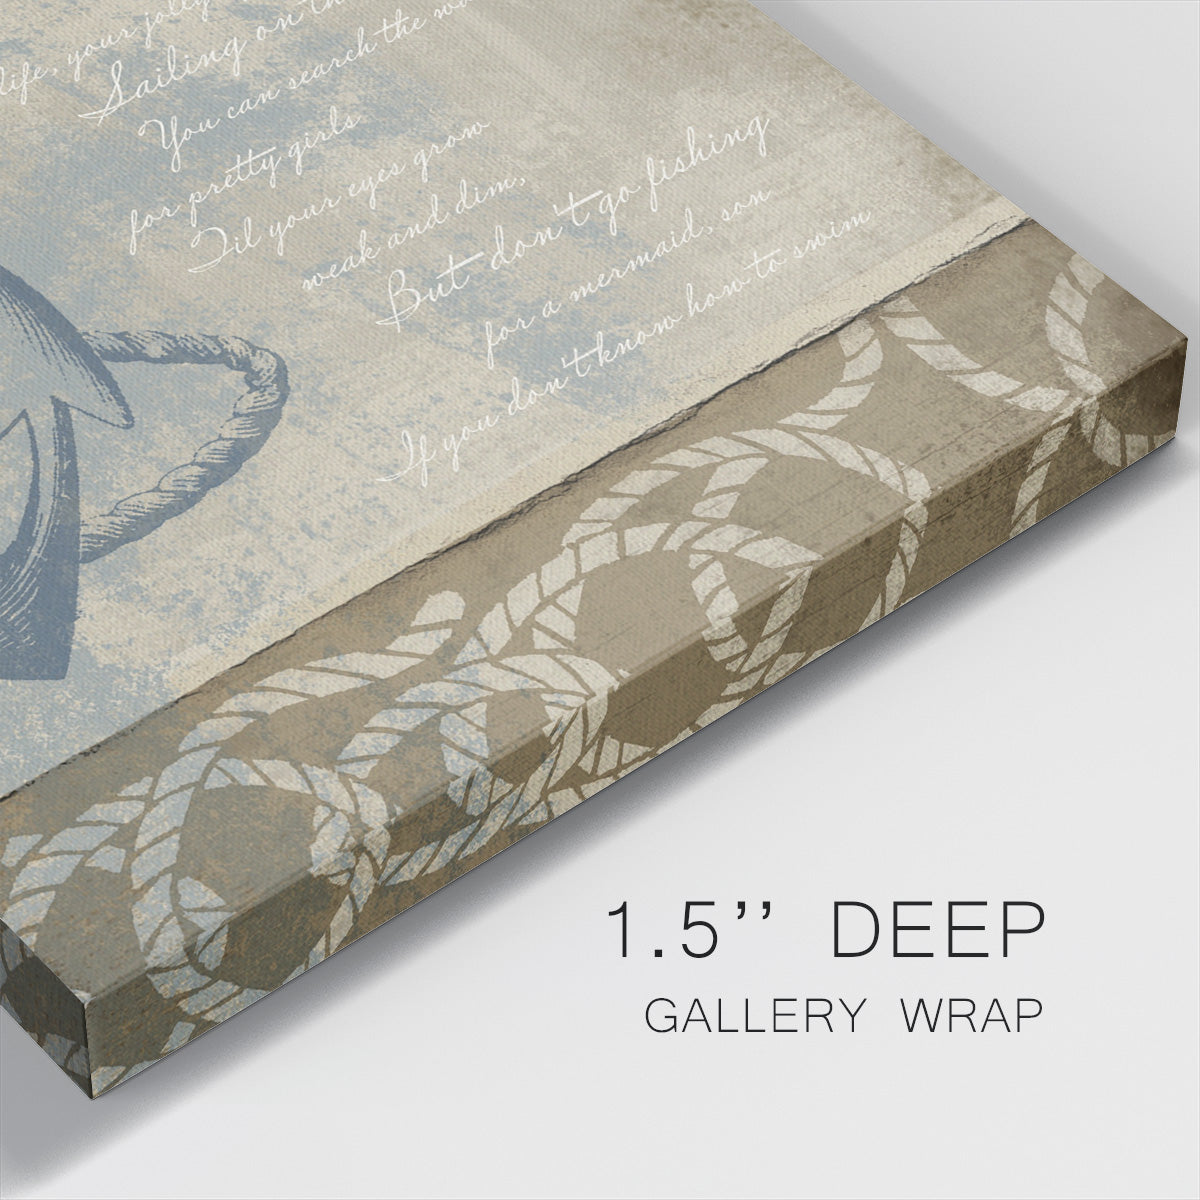 Coastal Inspiration VI-Premium Gallery Wrapped Canvas - Ready to Hang